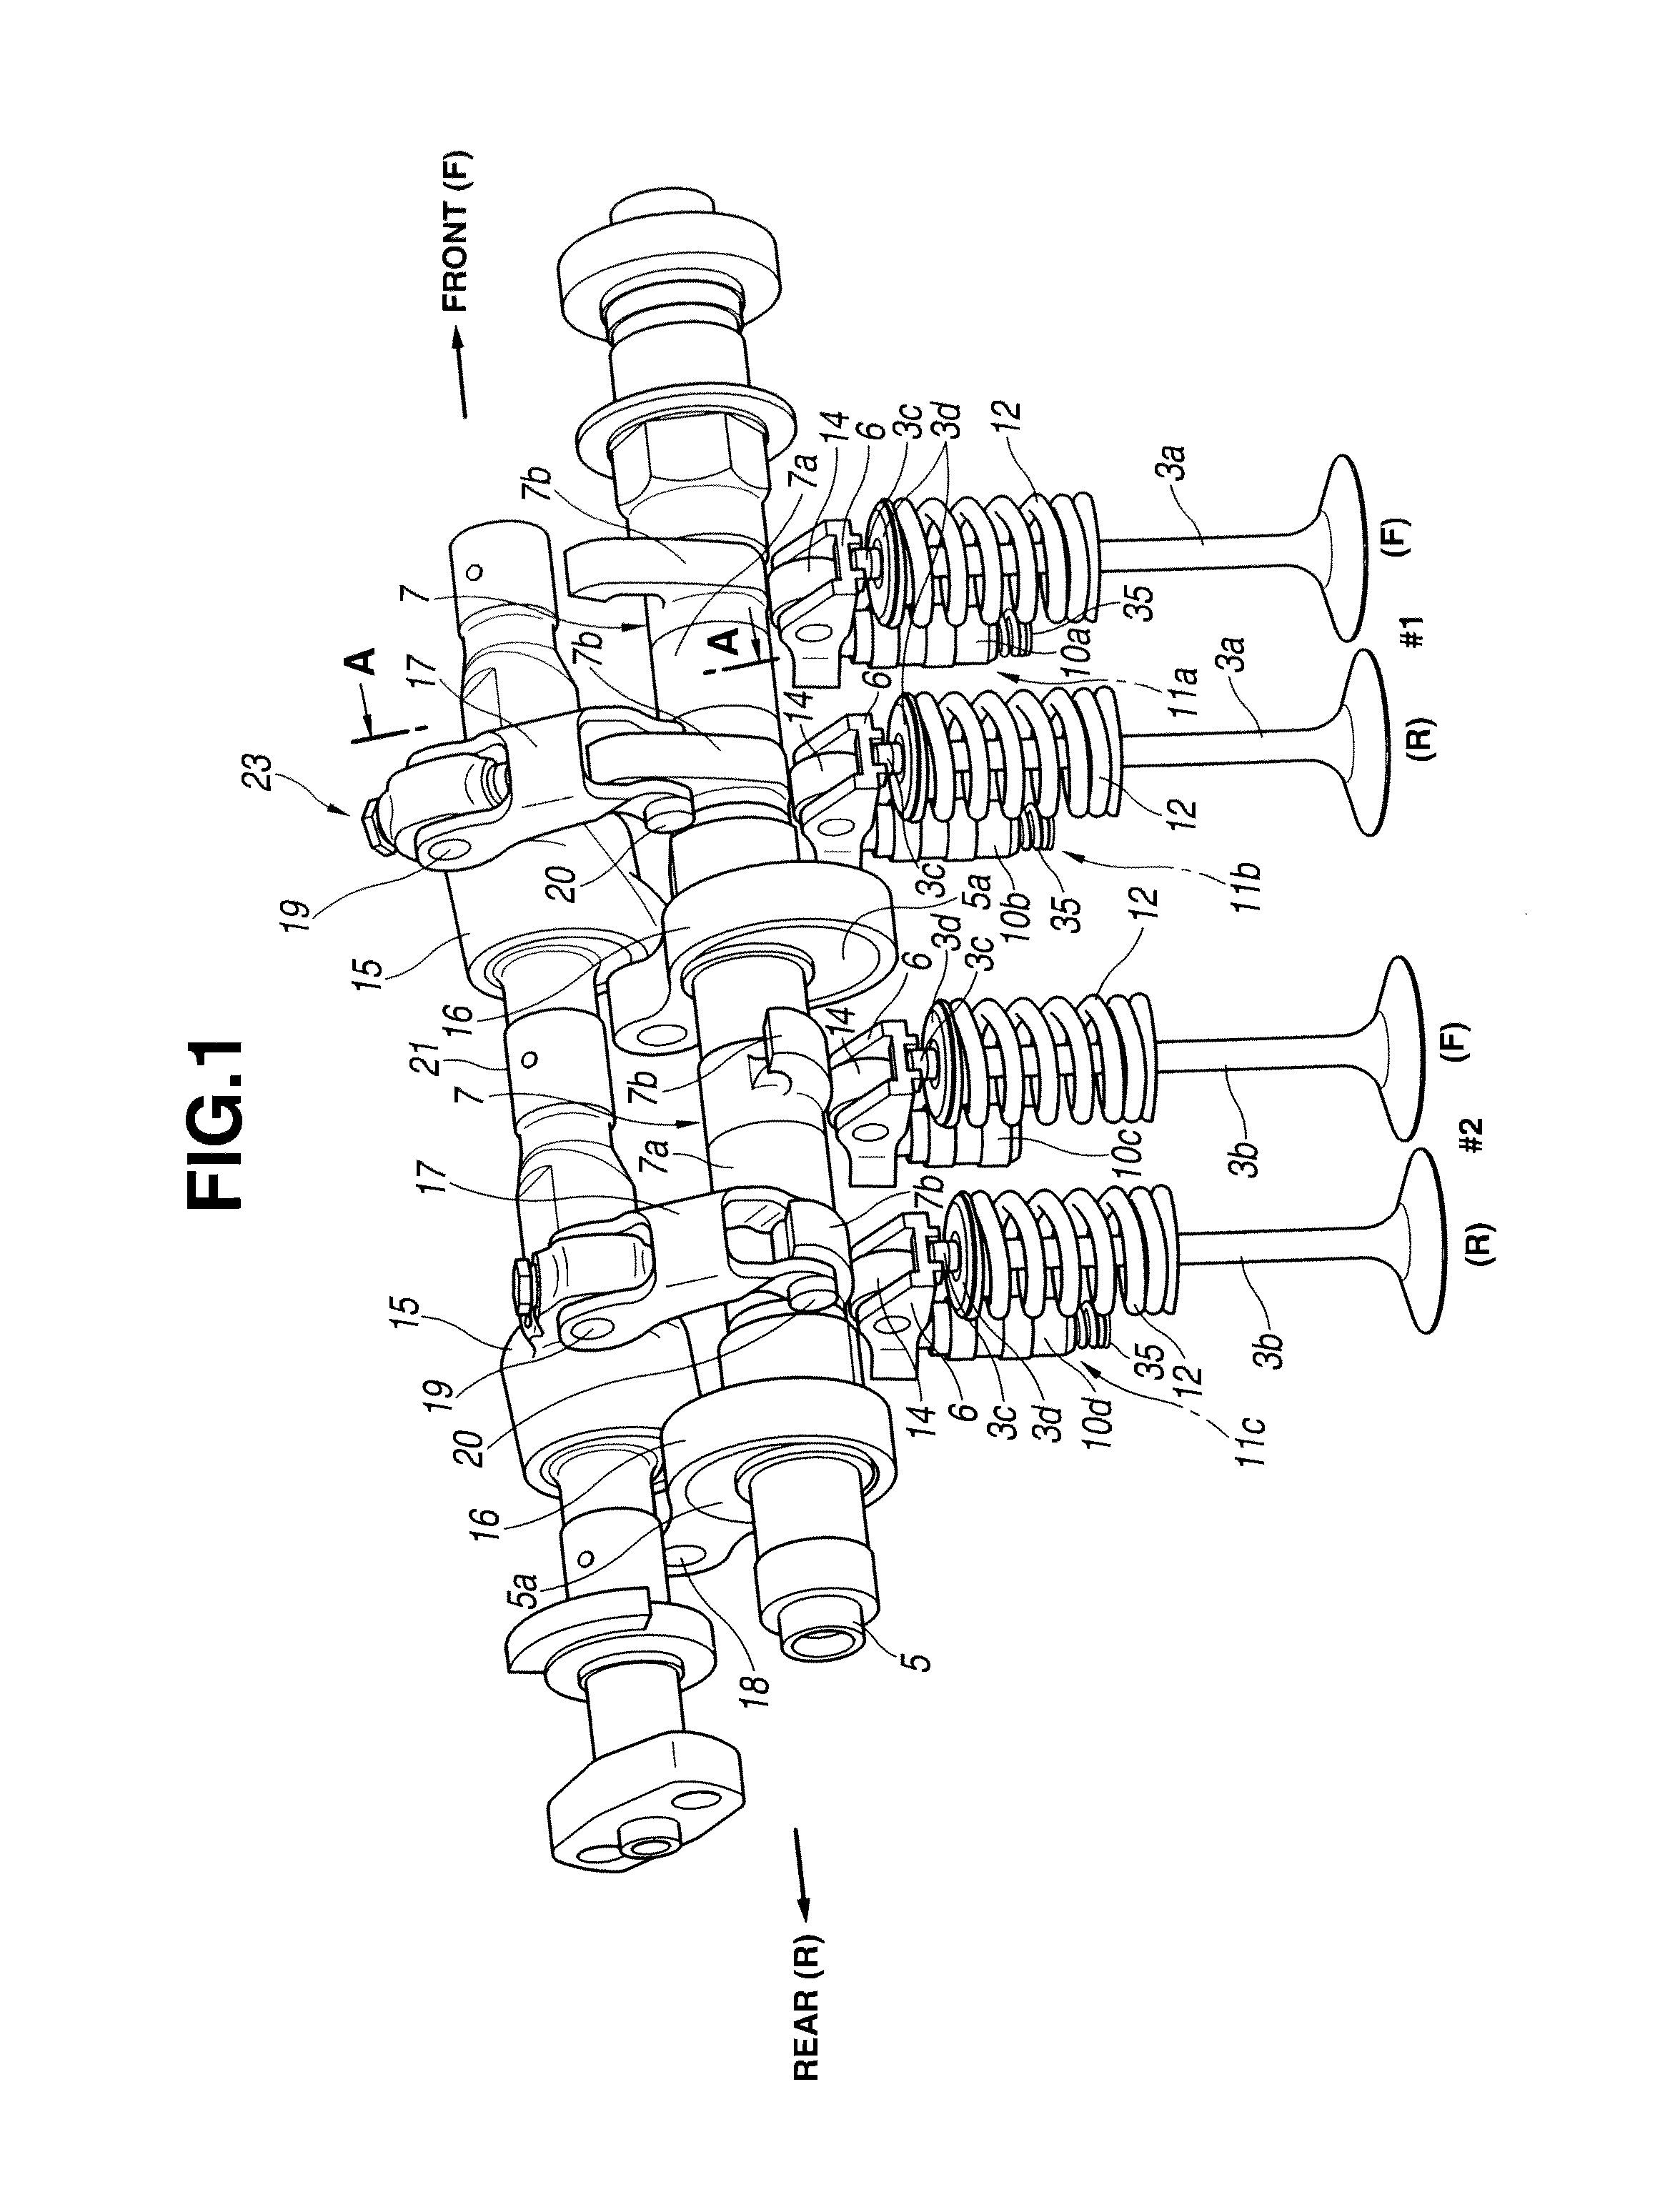 Variably operated valve system for multi-cylinder internal combustion engine and control apparatus for variably operated valve system